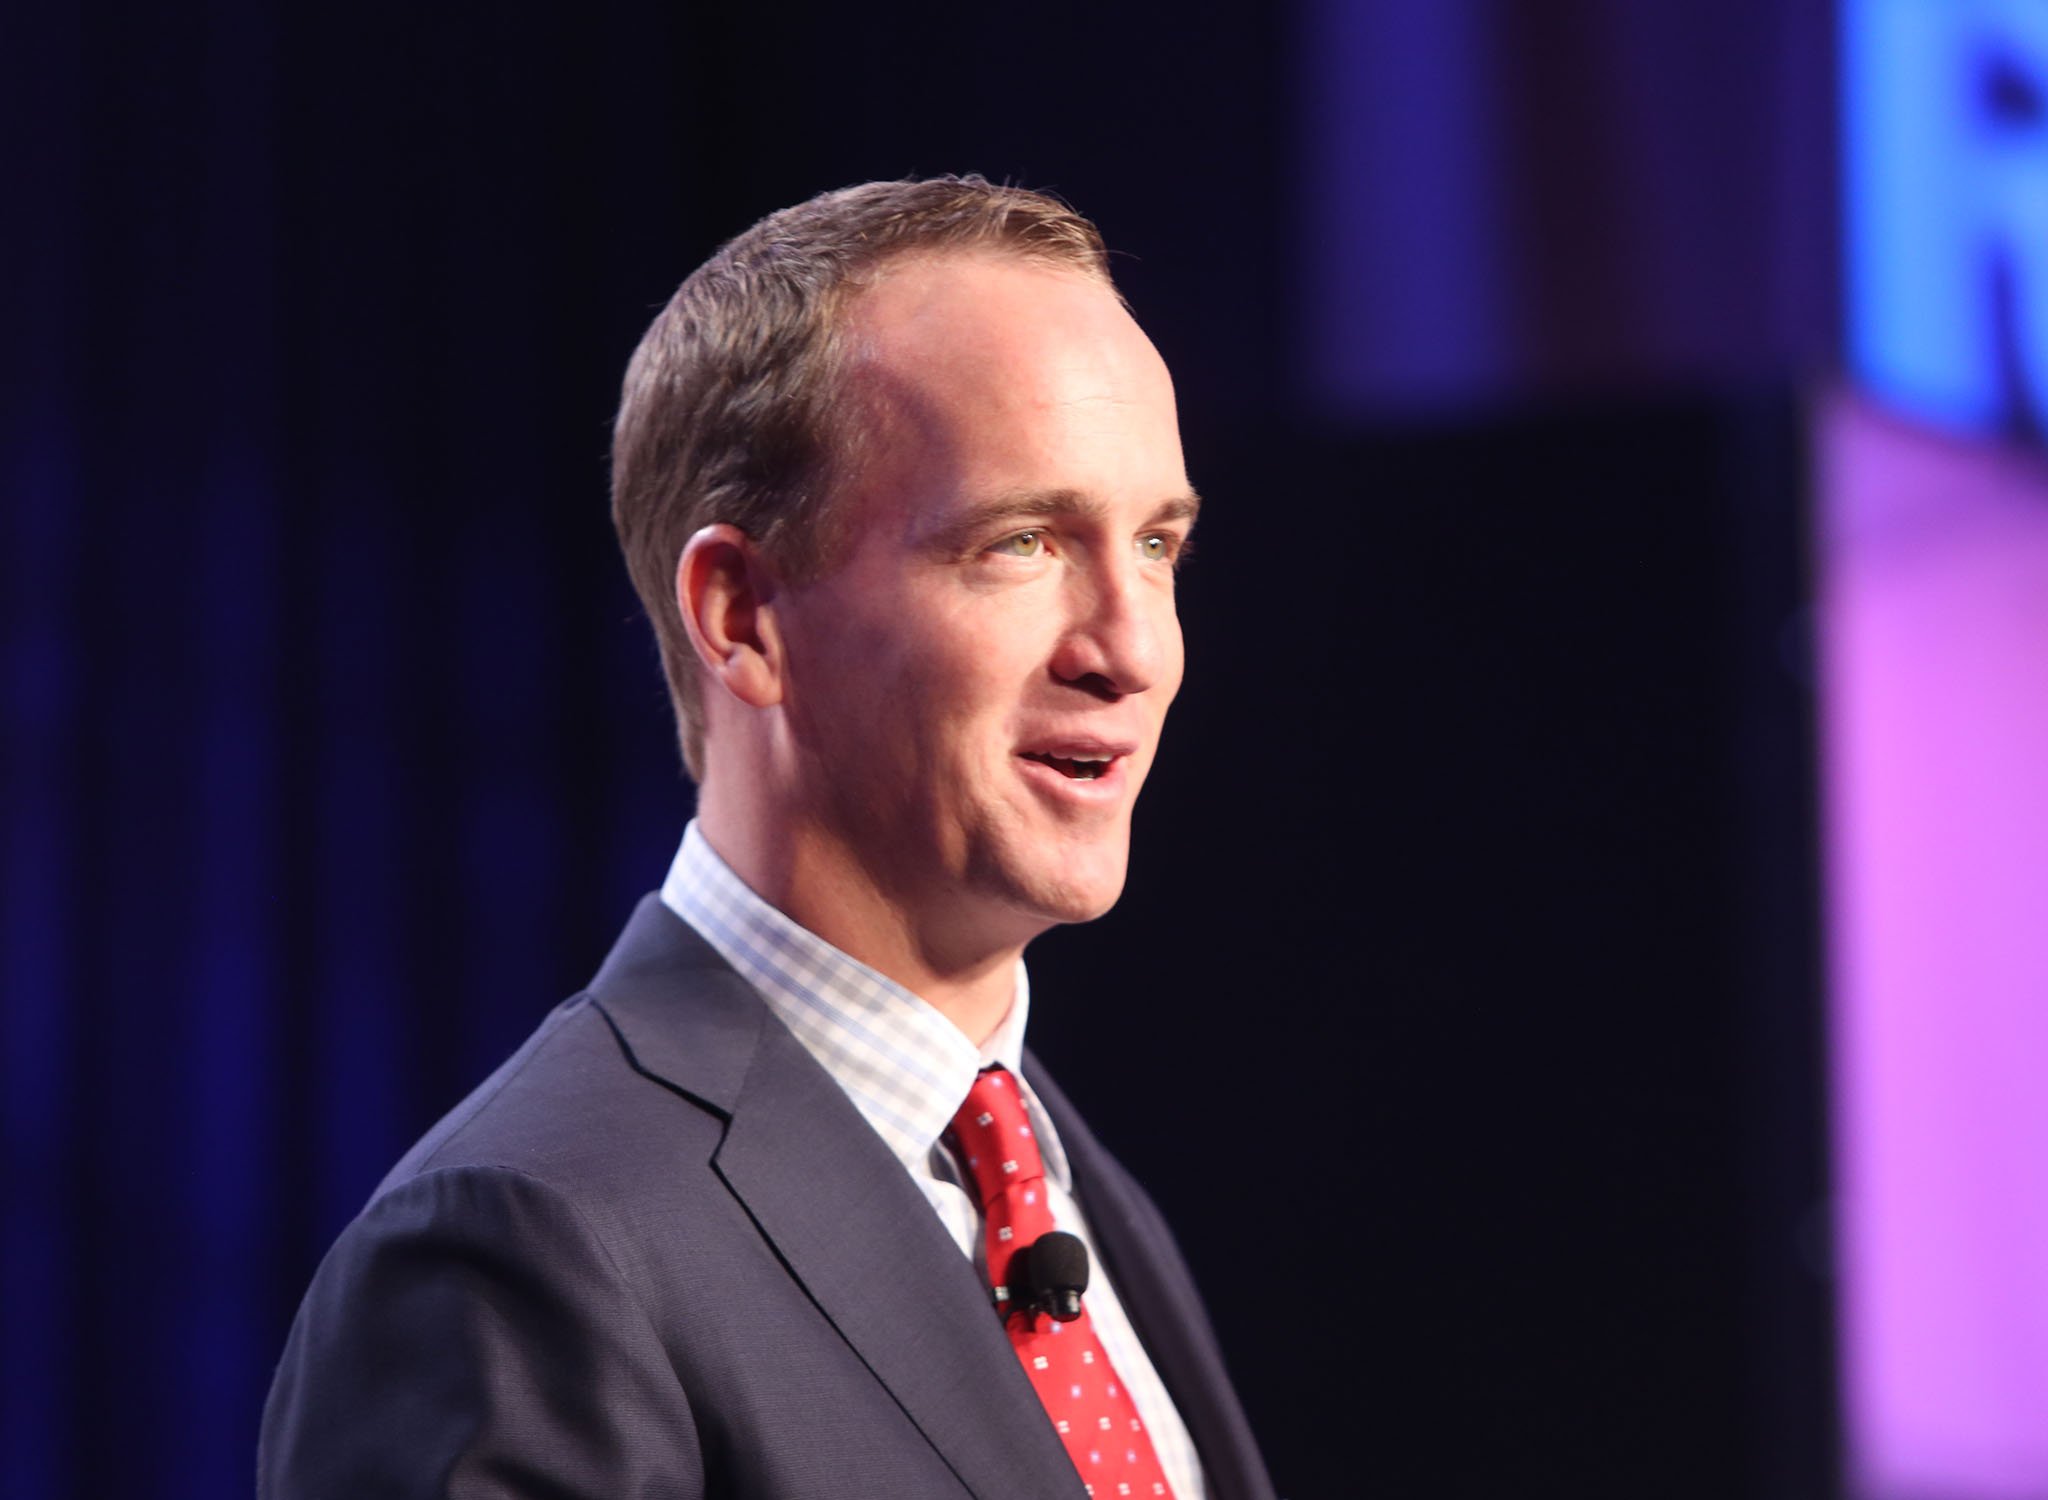 Trade show photography of Peyton Manning giving a keynote speech.